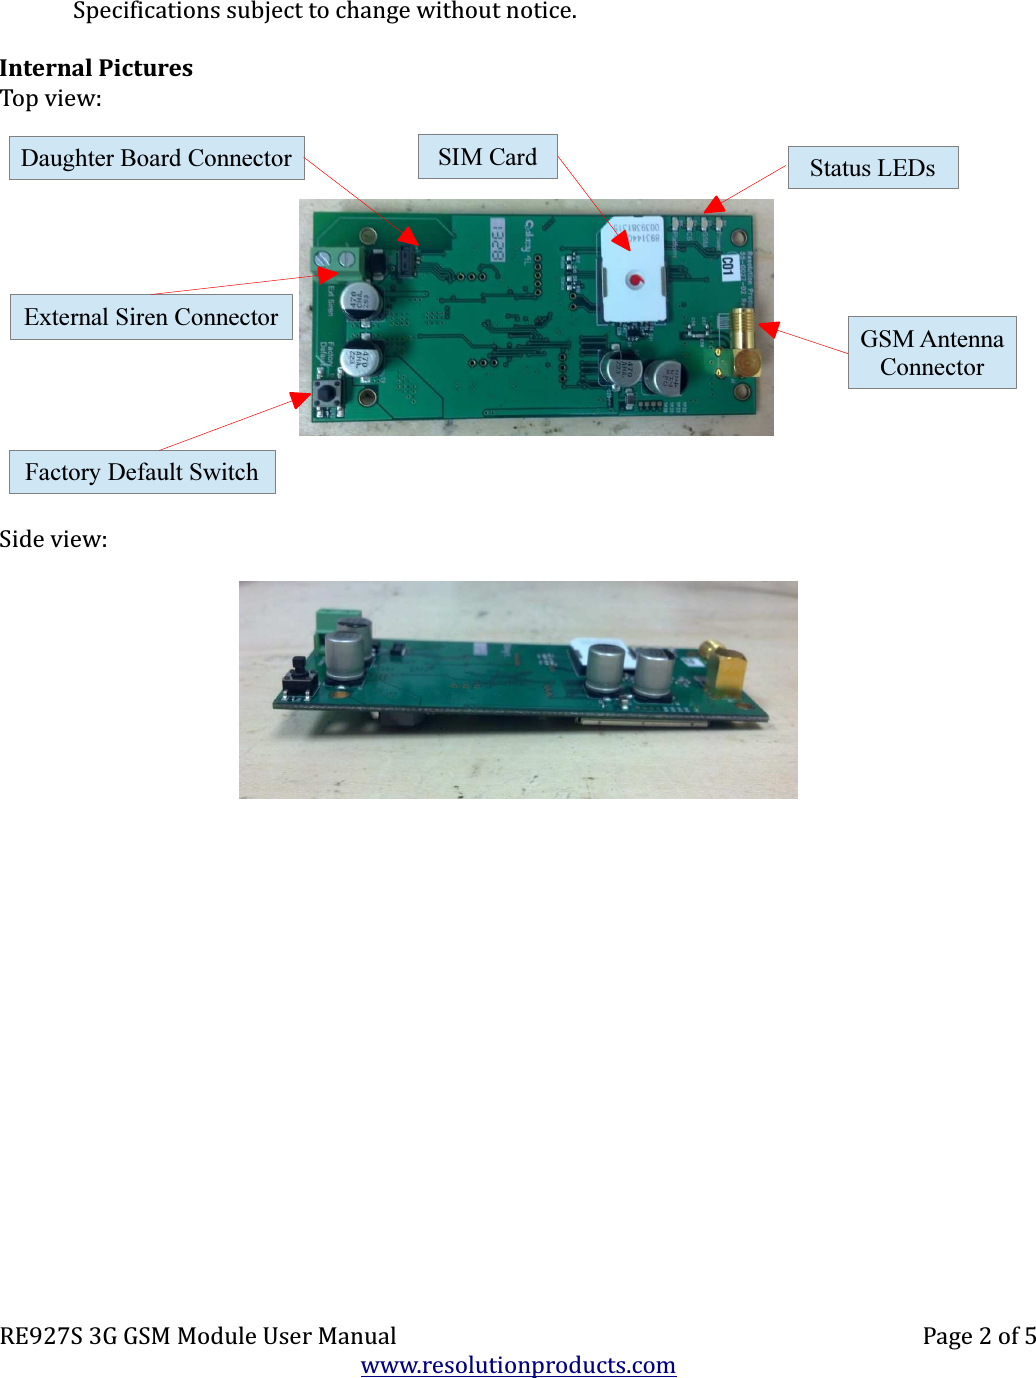 Specifications subject to change without notice.Internal PicturesTop view:Side view:RE927S 3G GSM Module User Manual Page 2 of 5www.resolutionproducts.comFactory Default SwitchExternal Siren ConnectorStatus LEDsDaughter Board Connector SIM CardGSM AntennaConnector